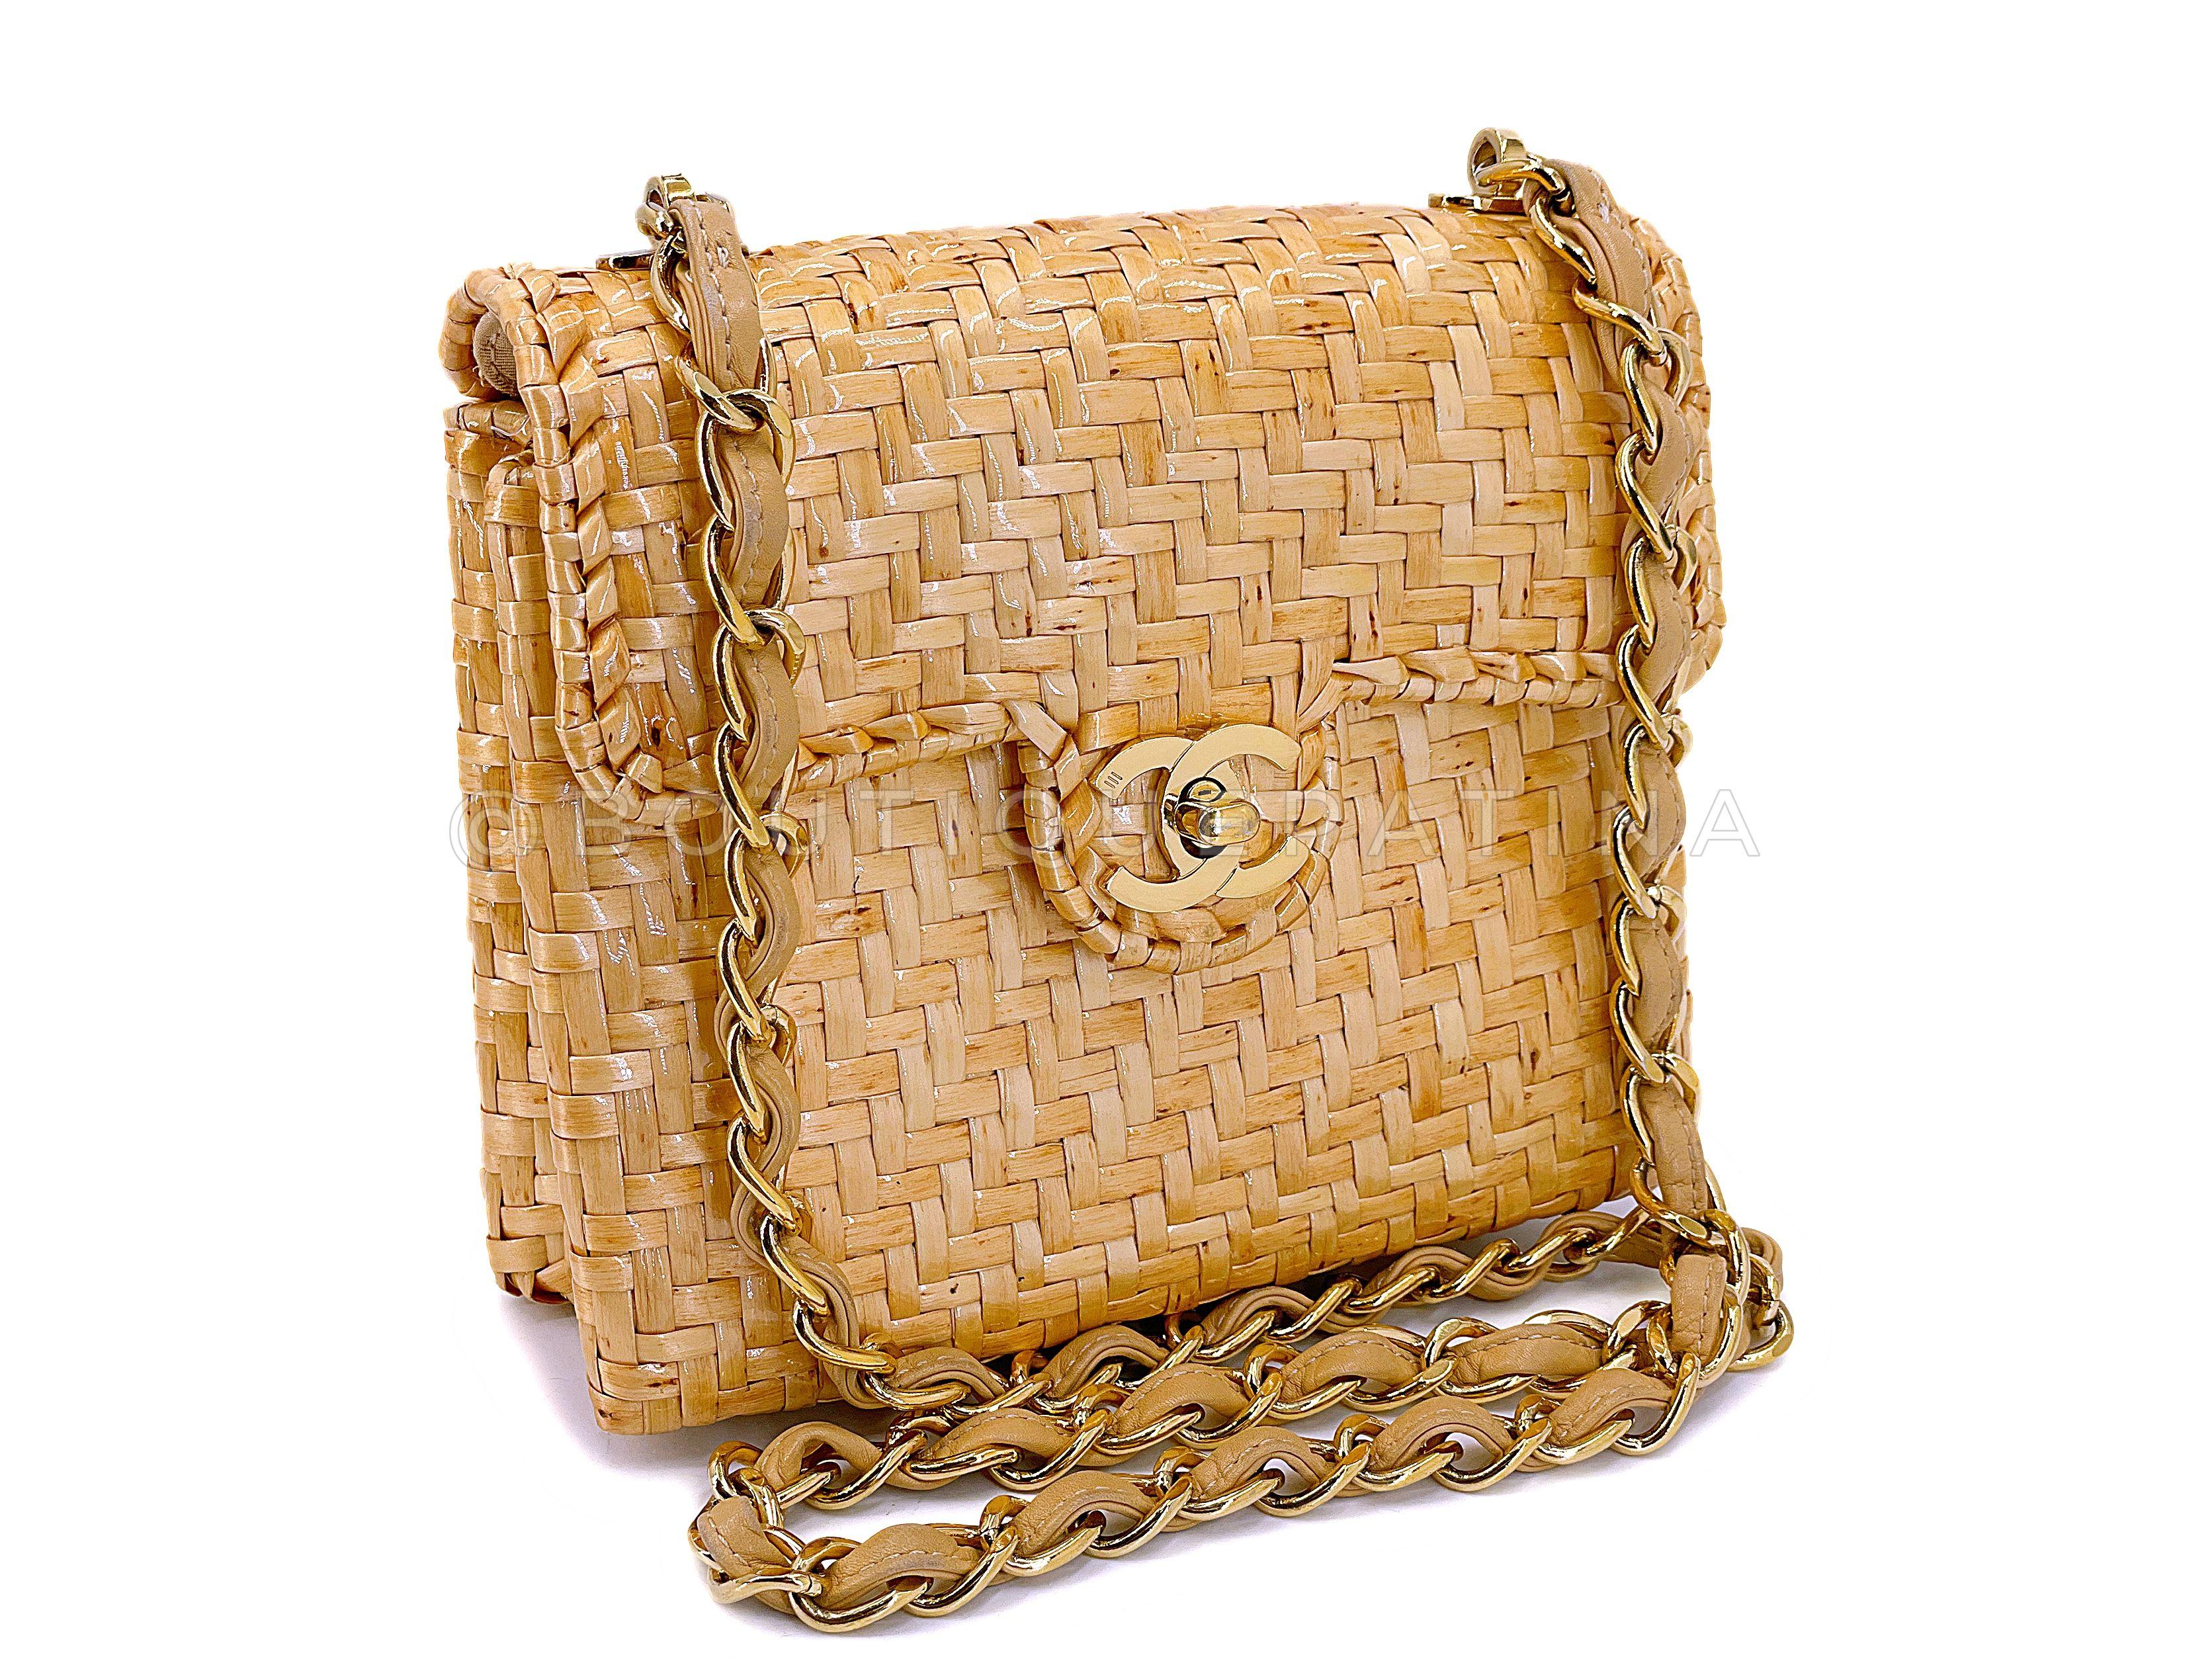 Store item: 67780
Rare Chanel 2000 Vintage Rattan Wicker Mini Flap Bag 24k GHW is a true collector's piece. If you know you know - a bag that will rarely if ever show up especially in this model. 

For 20 years, Boutique Patina has specialized in